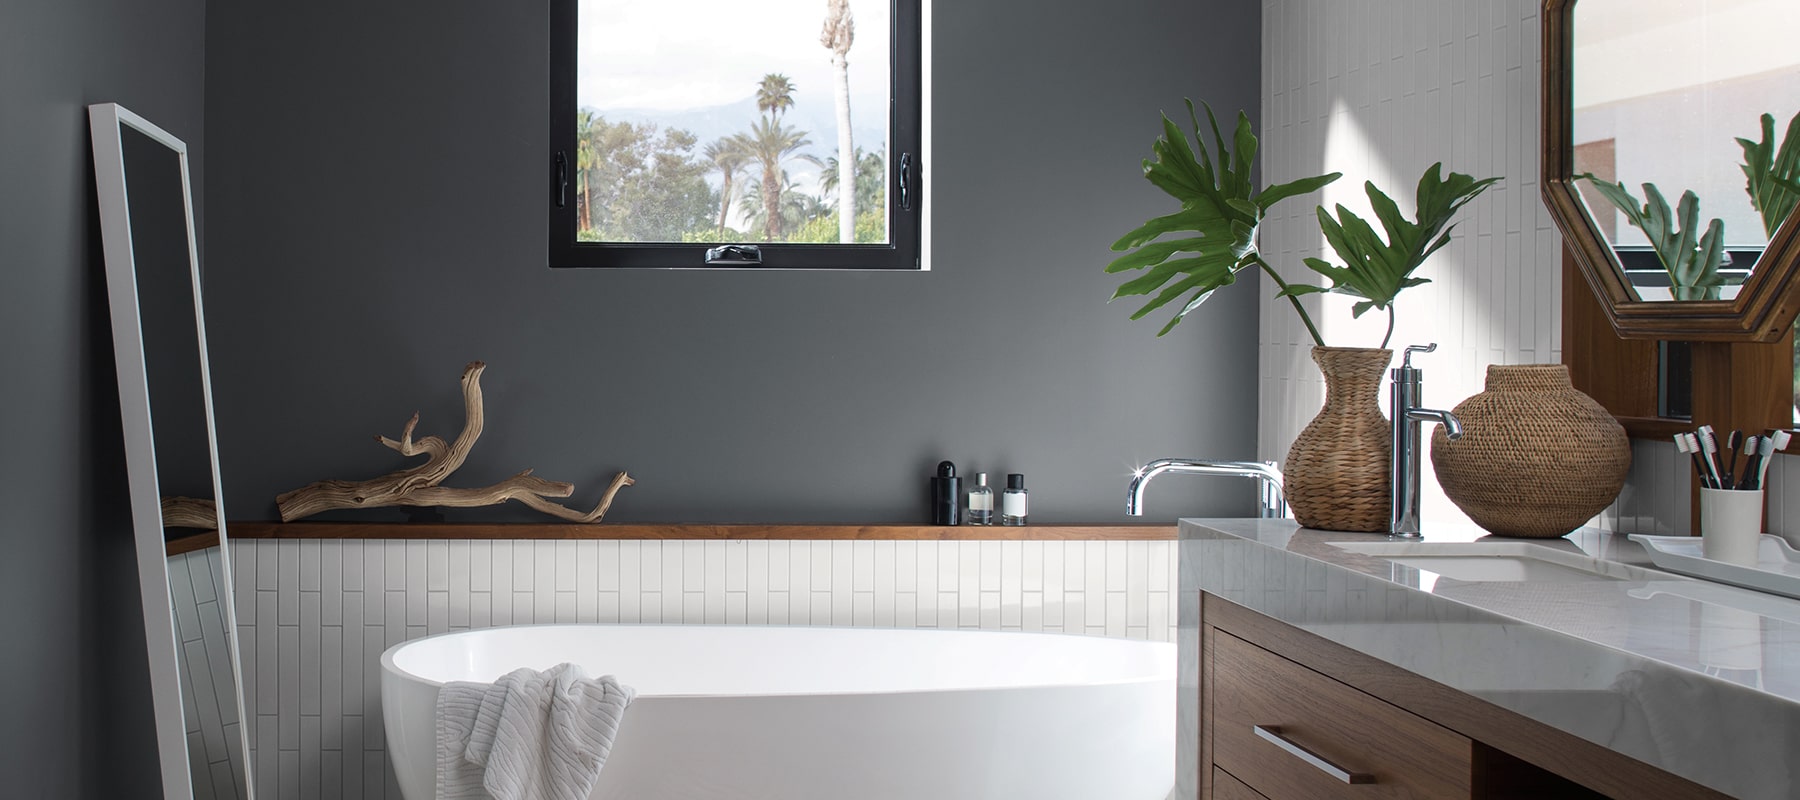 modern bathroom painted dark gray with white fixtures